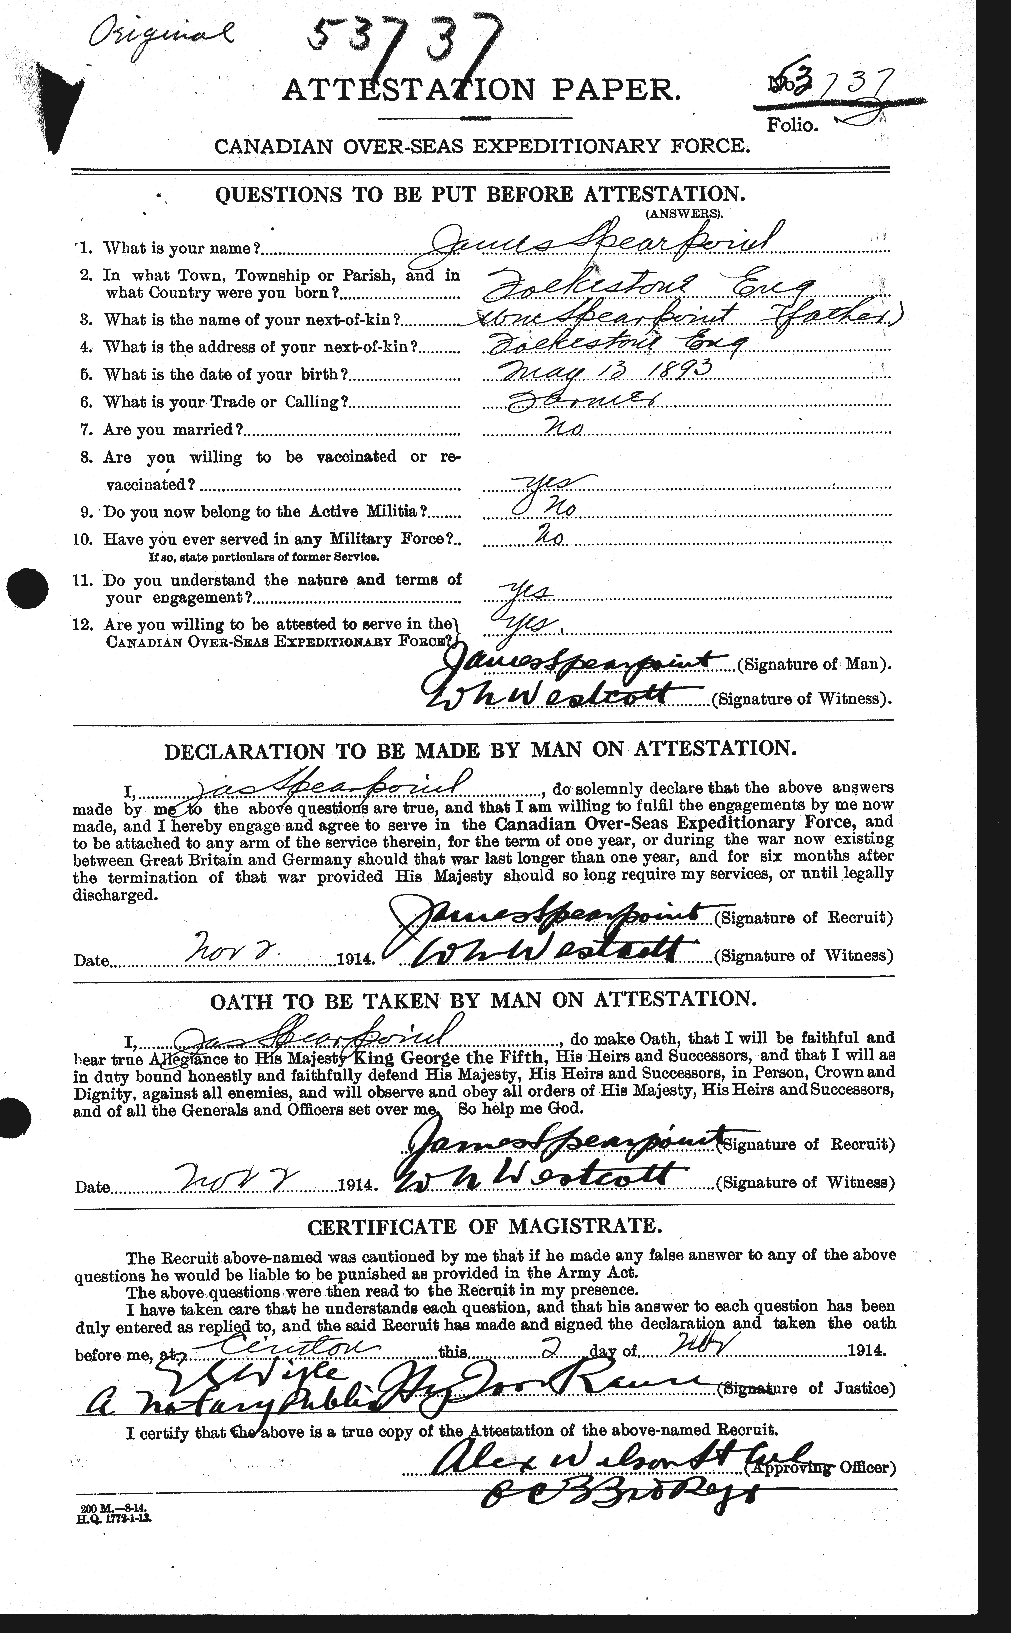 Personnel Records of the First World War - CEF 110665a